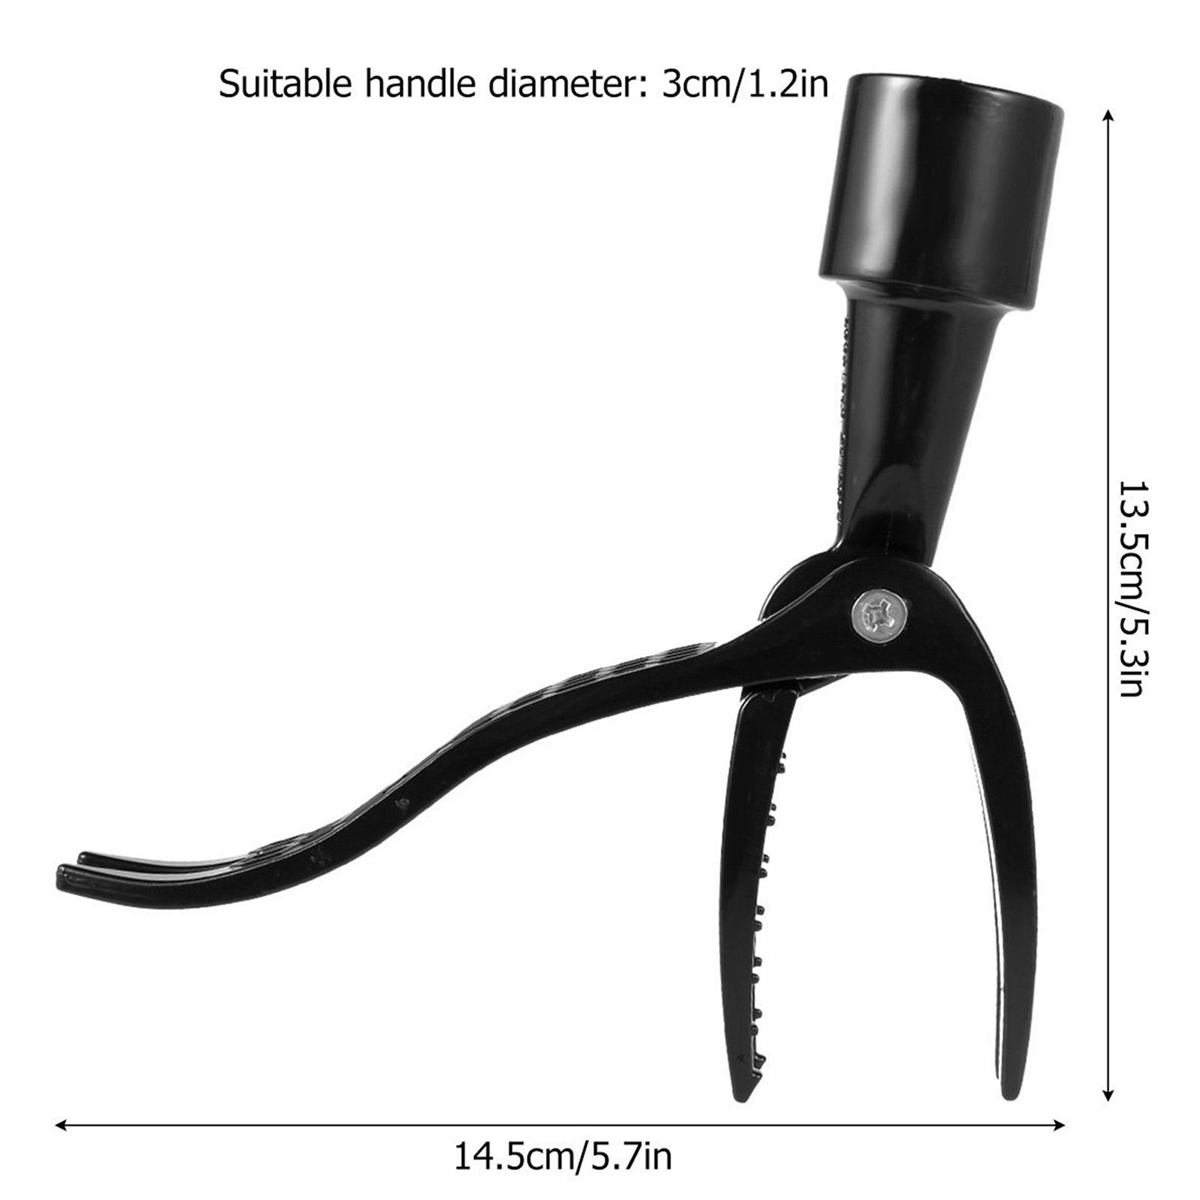 Claw Weeder the Stand Up Weed Puller Tool Root Remover Replacement Foot Garden Pedal Metal Outdoor With Head Weeding Weeder